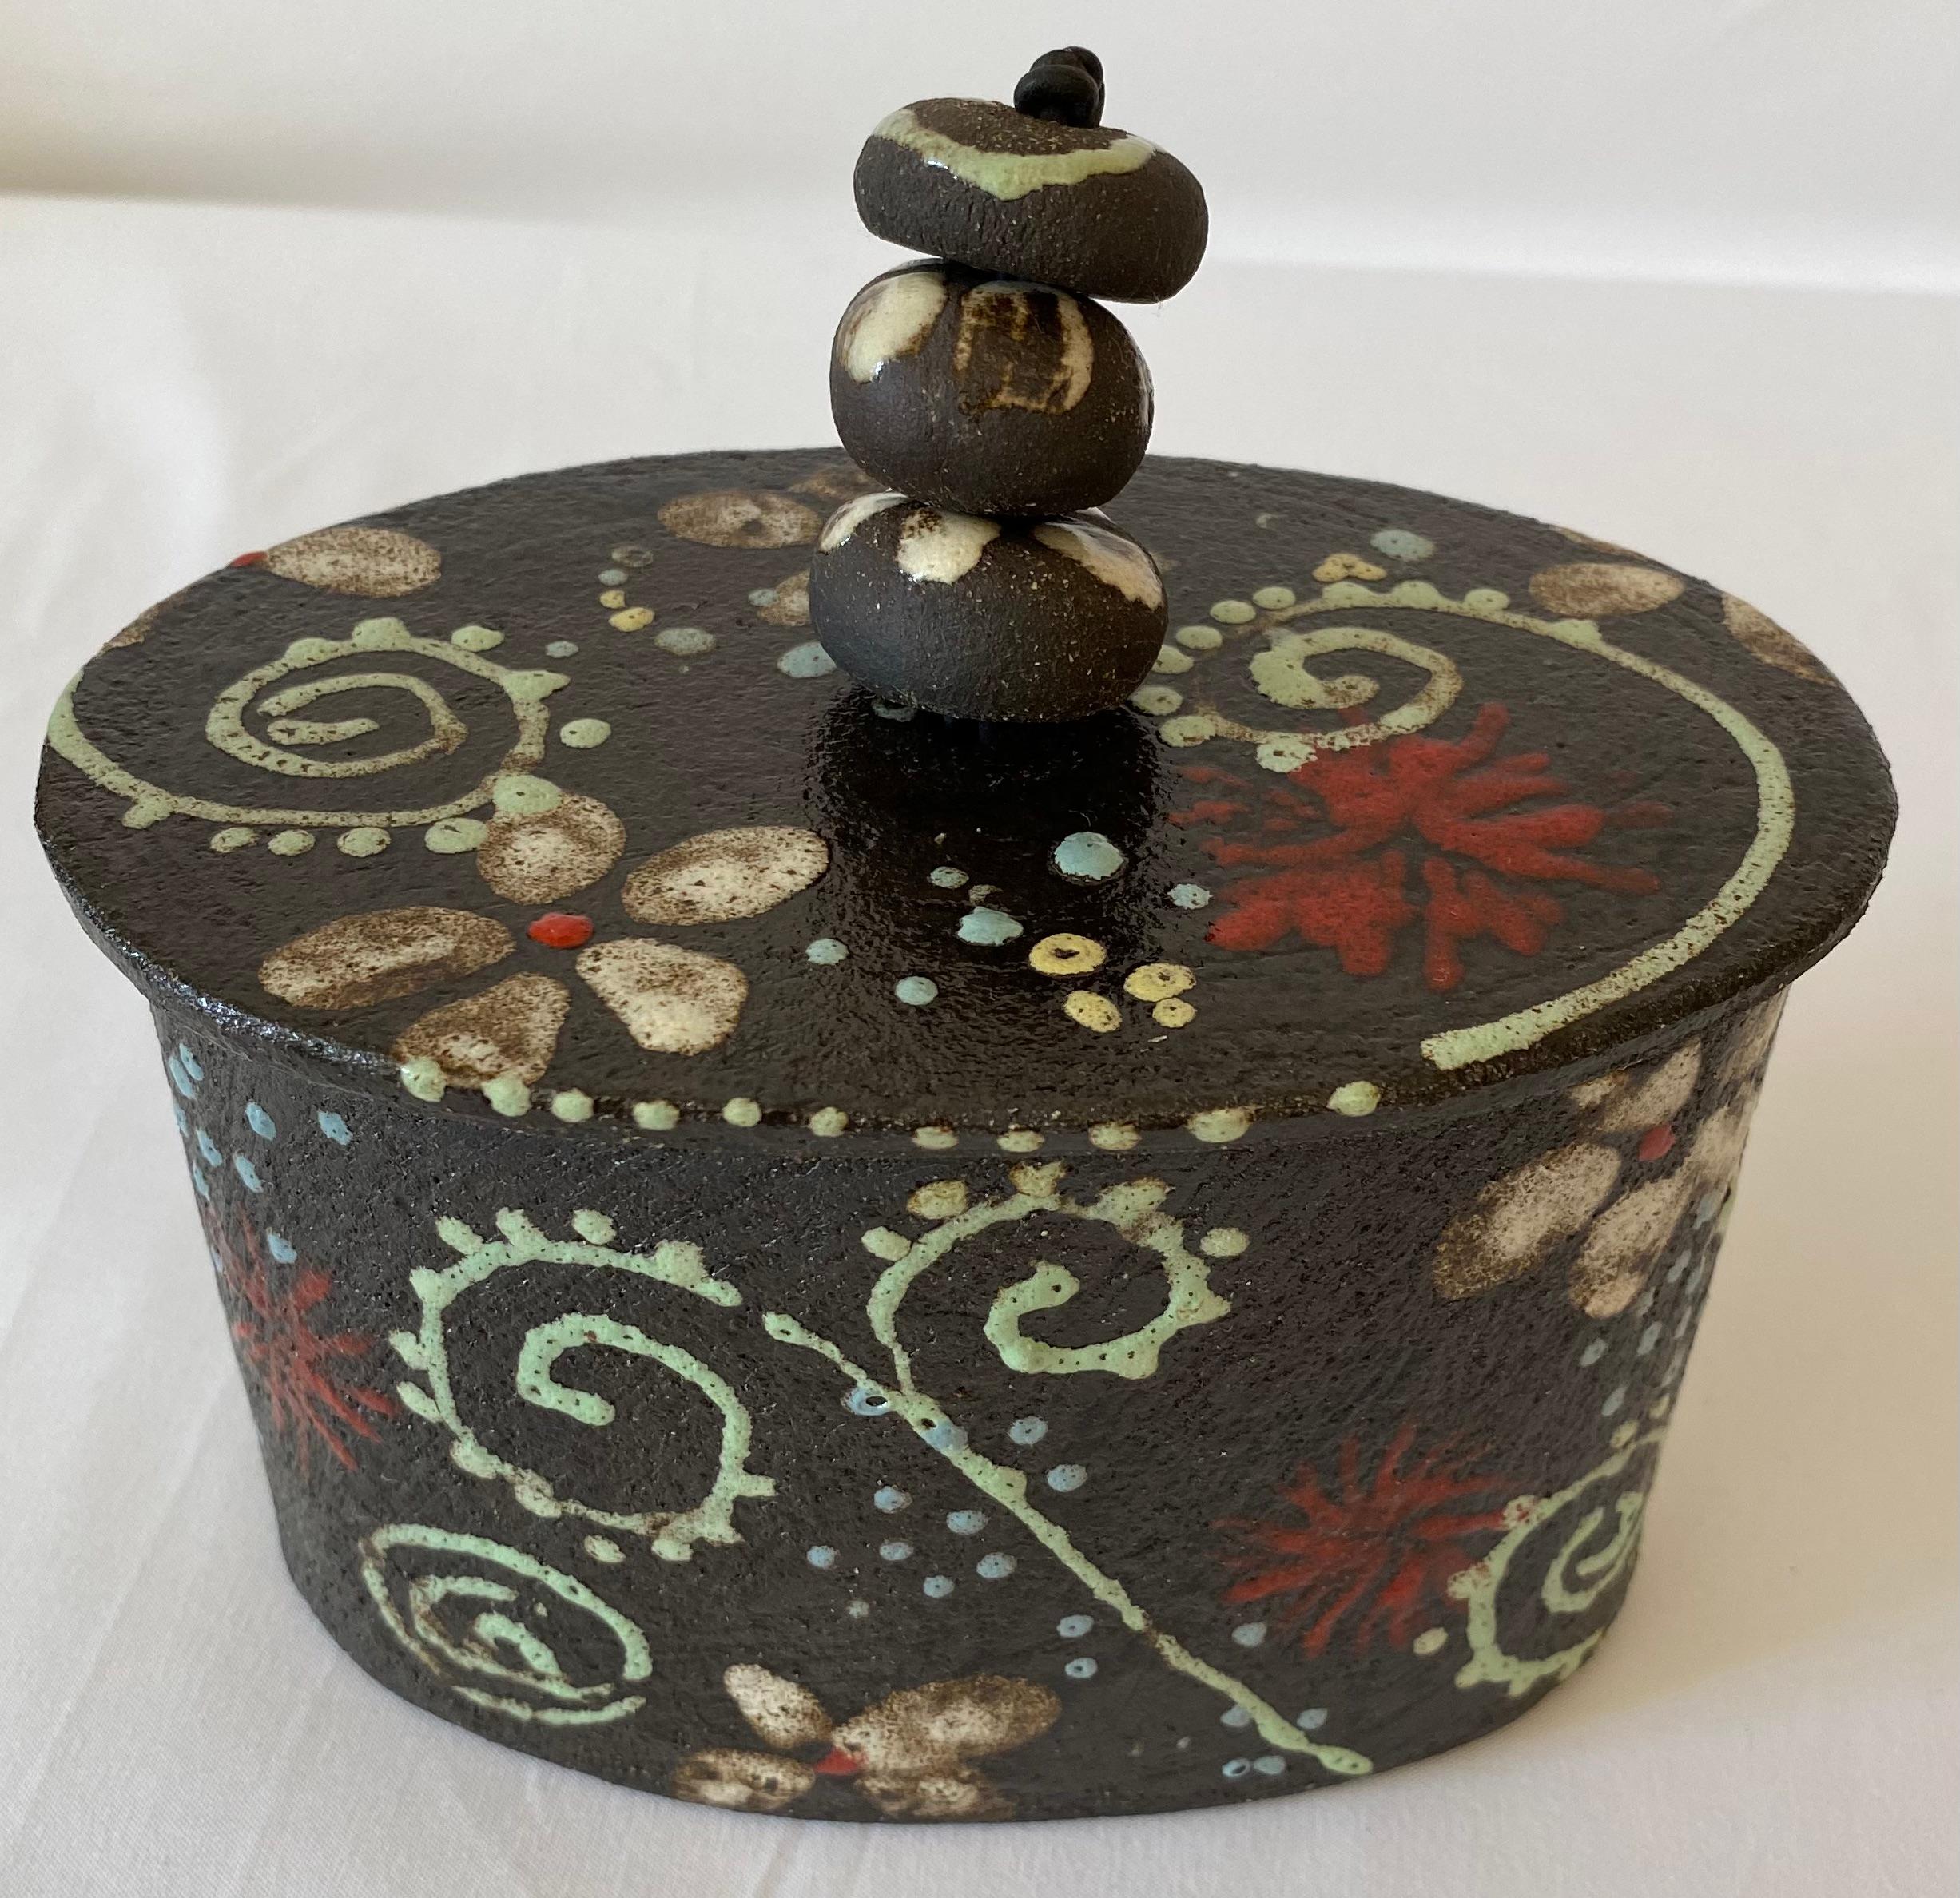 A beautiful hand-crafted ceramic lidded trinket or jewelry box. 
Mid-20th century, French. 
Used as decorative item, this piece would enhance any shelf or tabletop.

Measures:  6 1/8